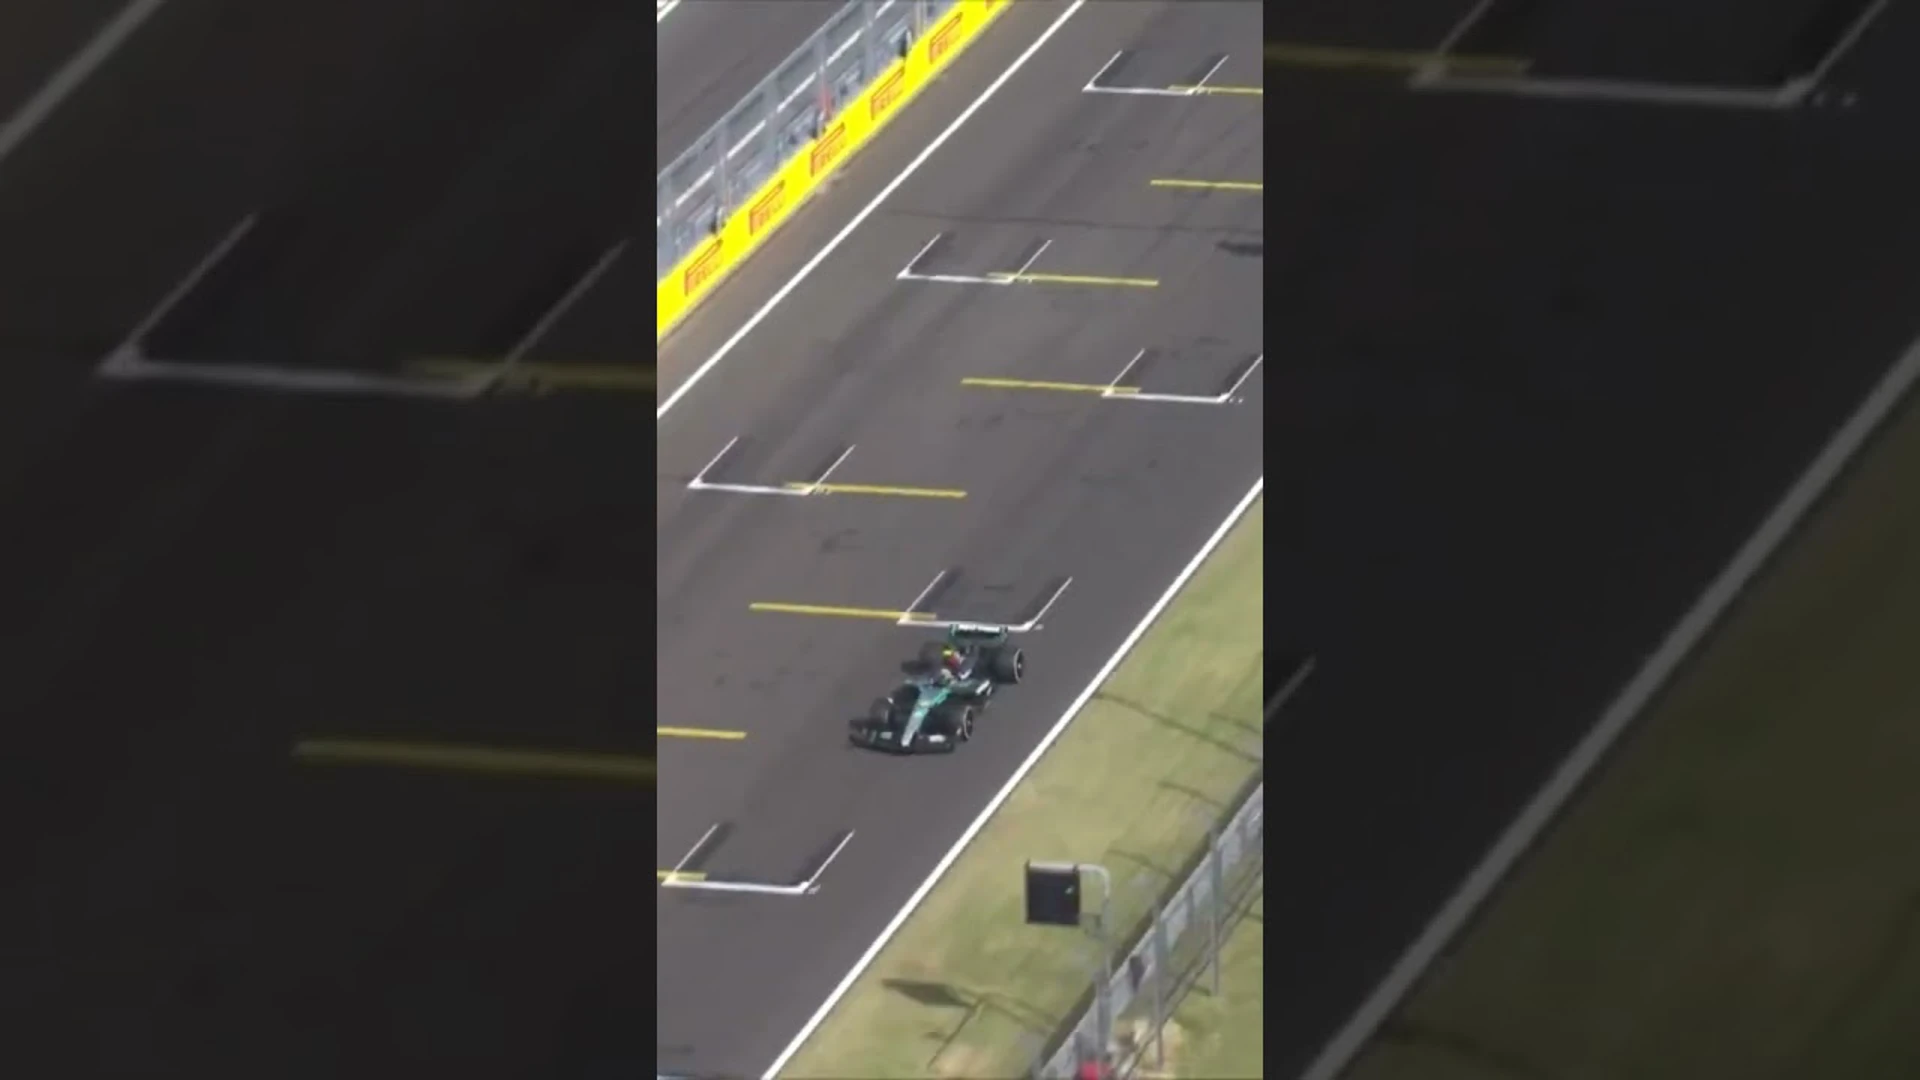 RELIVE! The moment Max collided with Hamilton